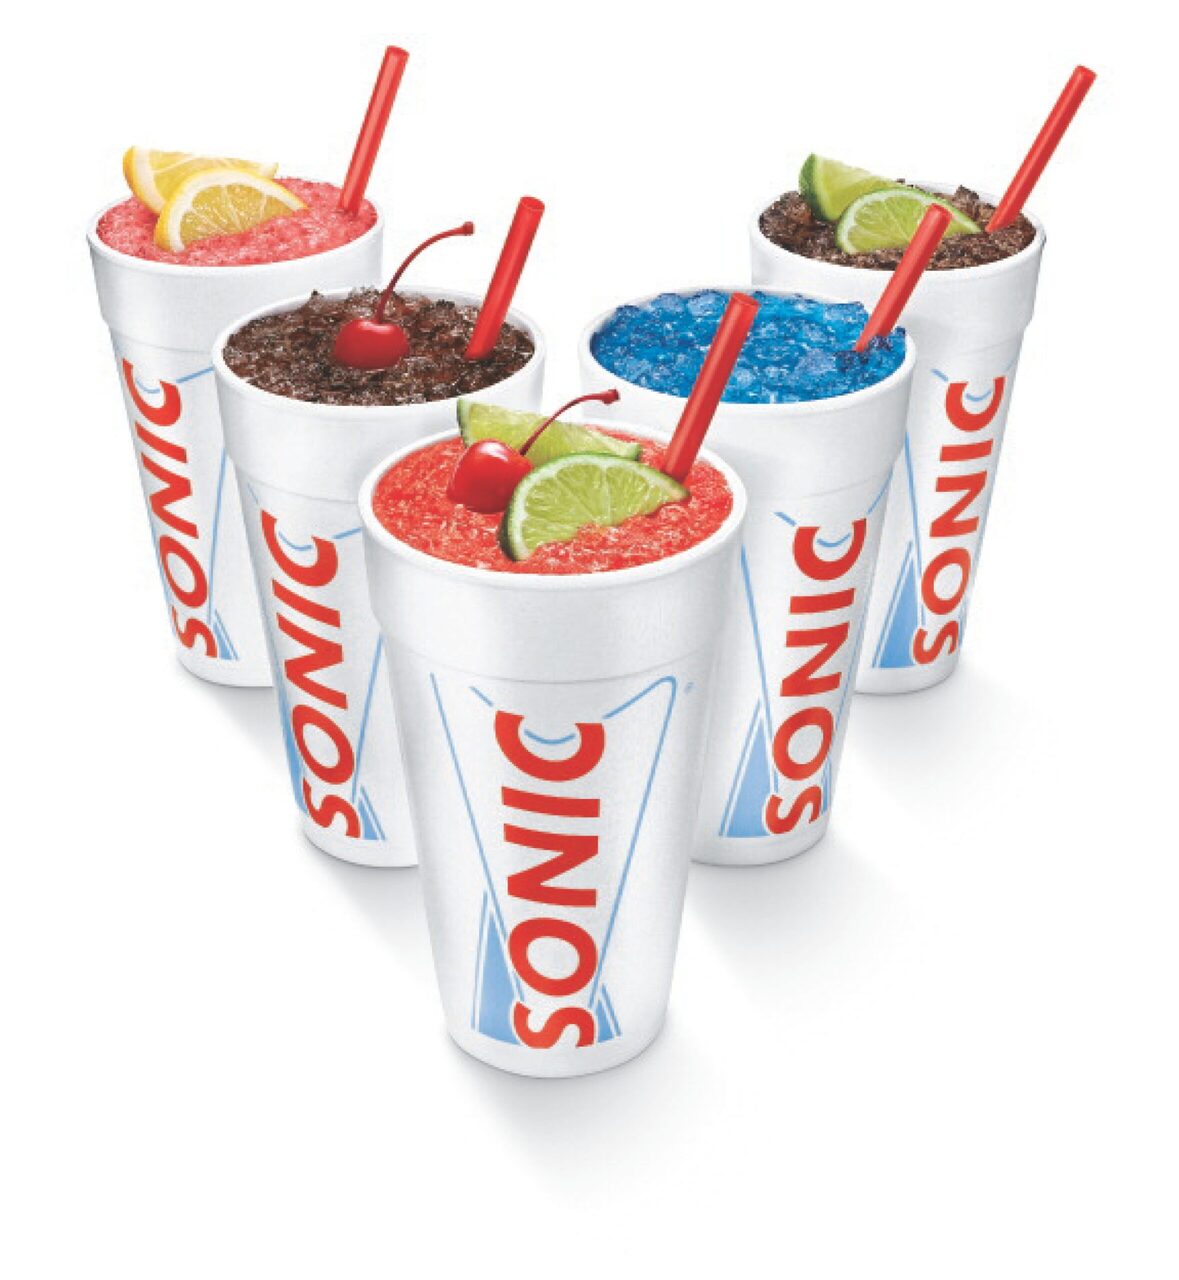 Sonic Has New Drinks With Bursting Bubbles And I Can't Wait To Try One!